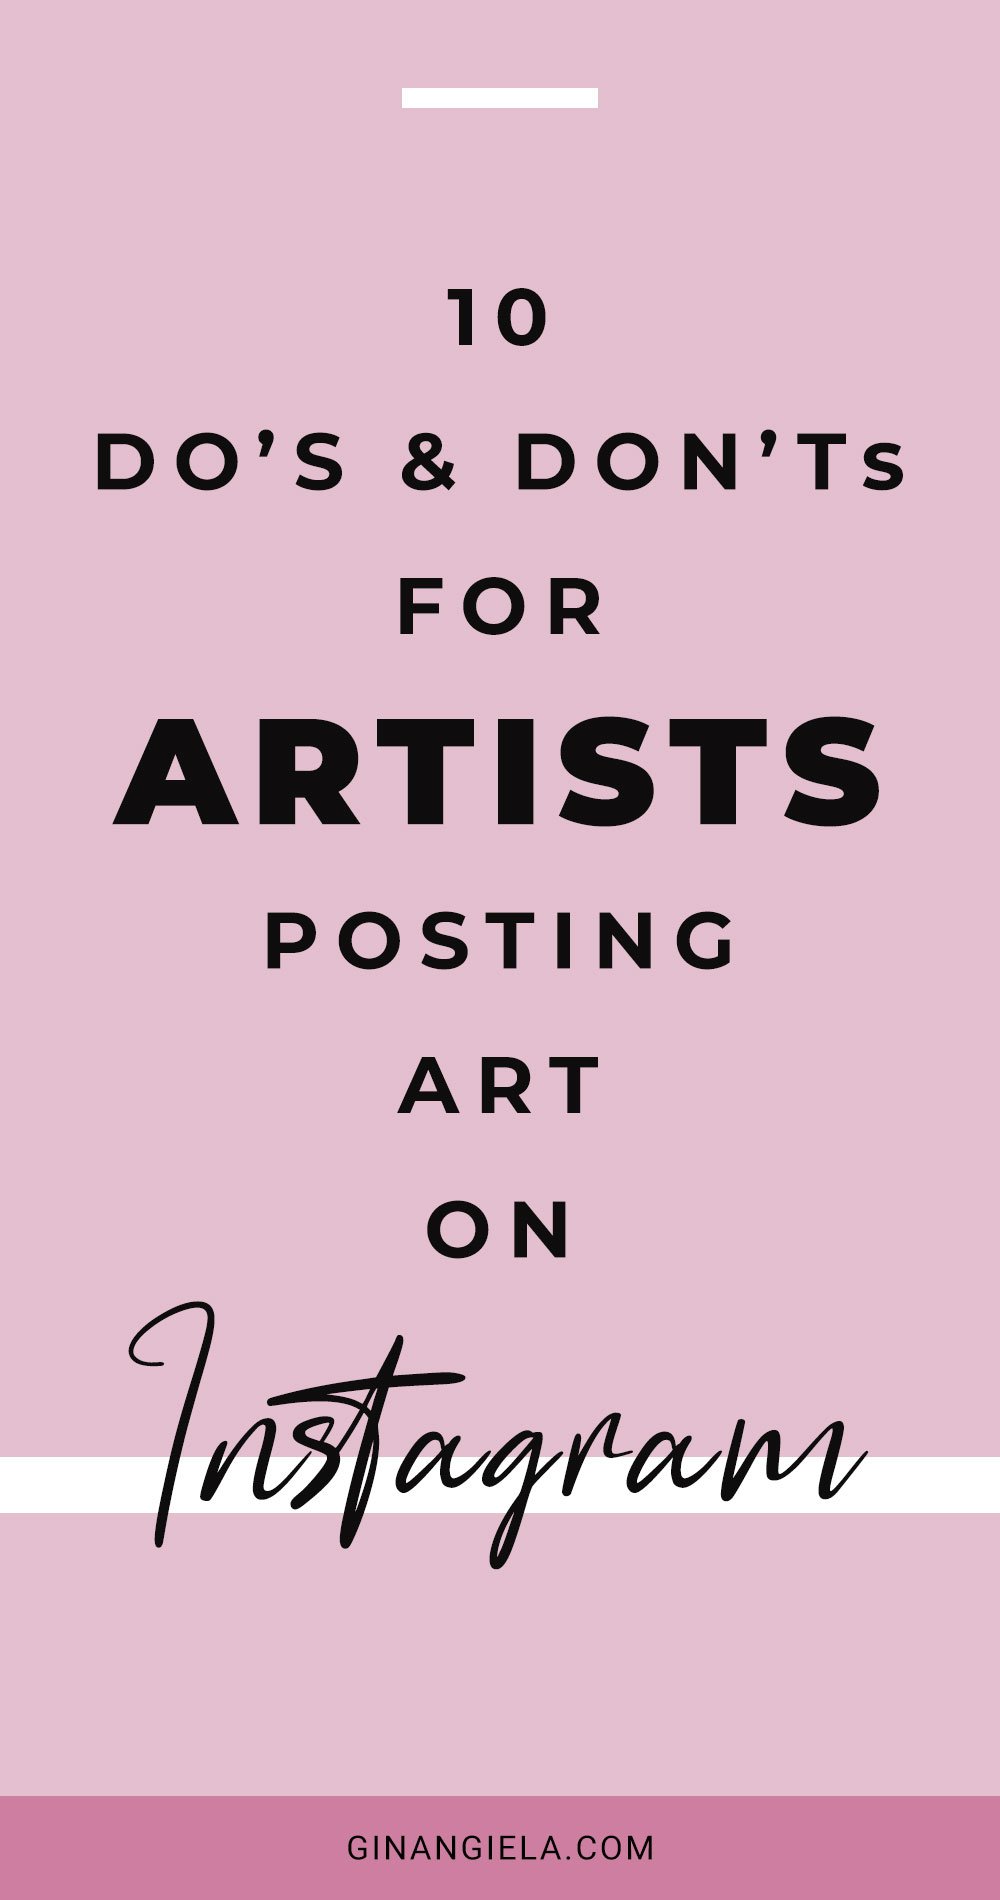 10 DOs & DON'Ts For Artists Posting Art On Instagram